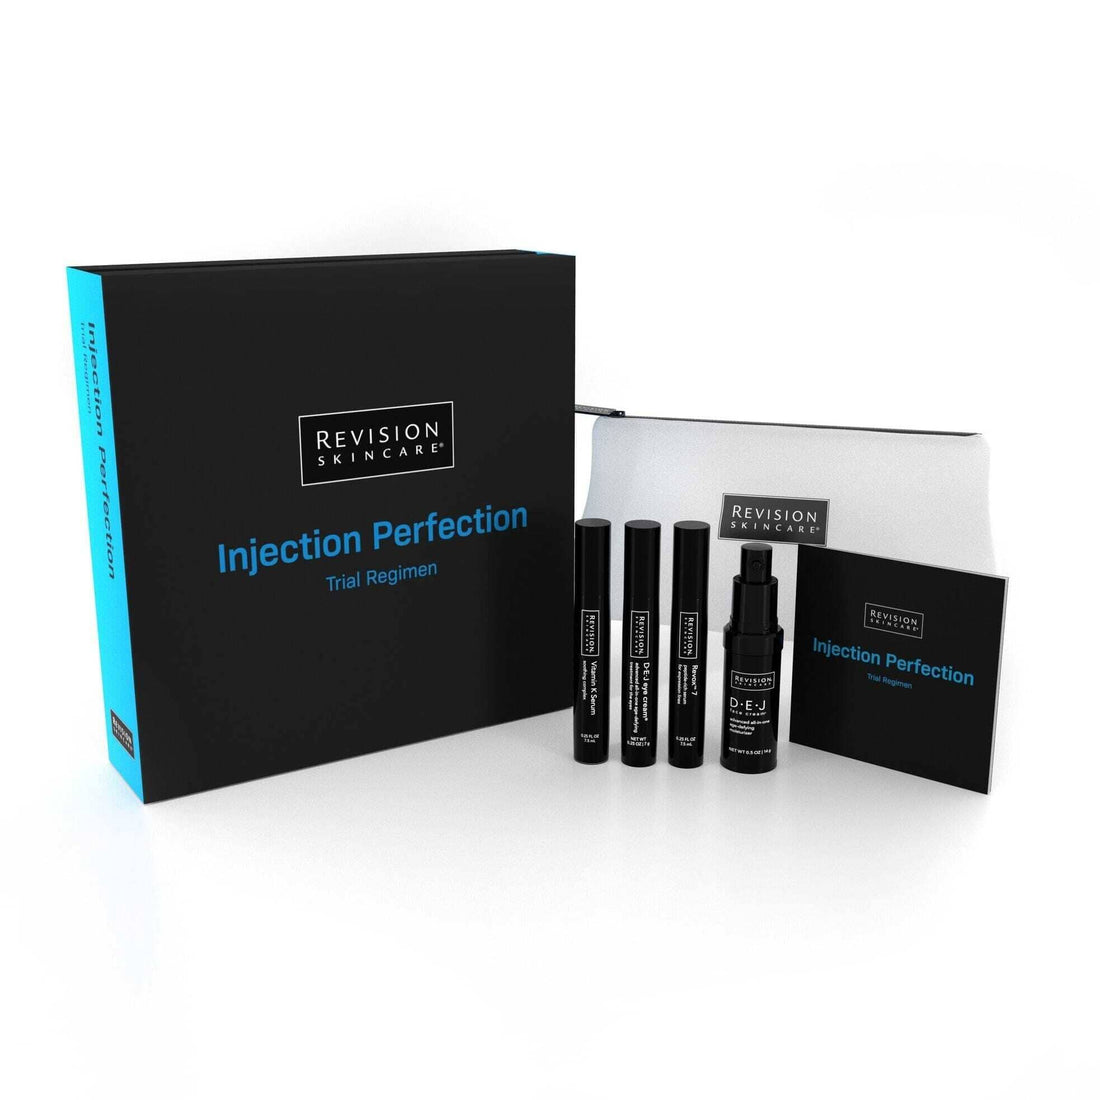 Revision Skincare Injection Perfection Trial Regimen Revision Shop at Skin Type Solutions